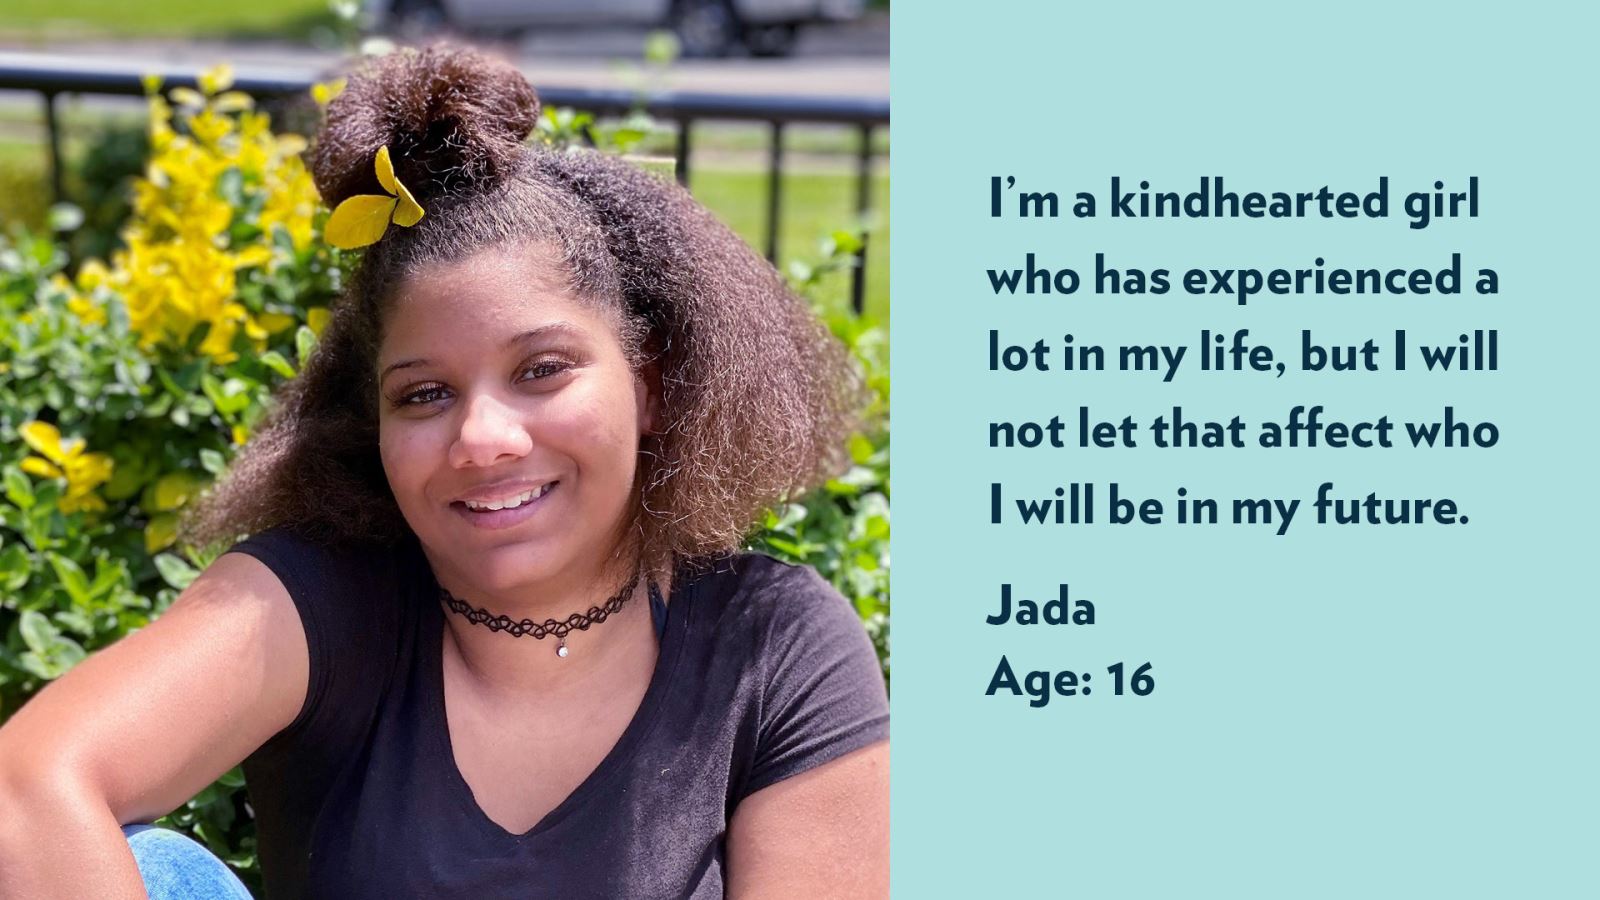 Jada, age 16. I’m a kindhearted girl who has experienced a lot in my life, but I will not let that affect who I will be in my future.